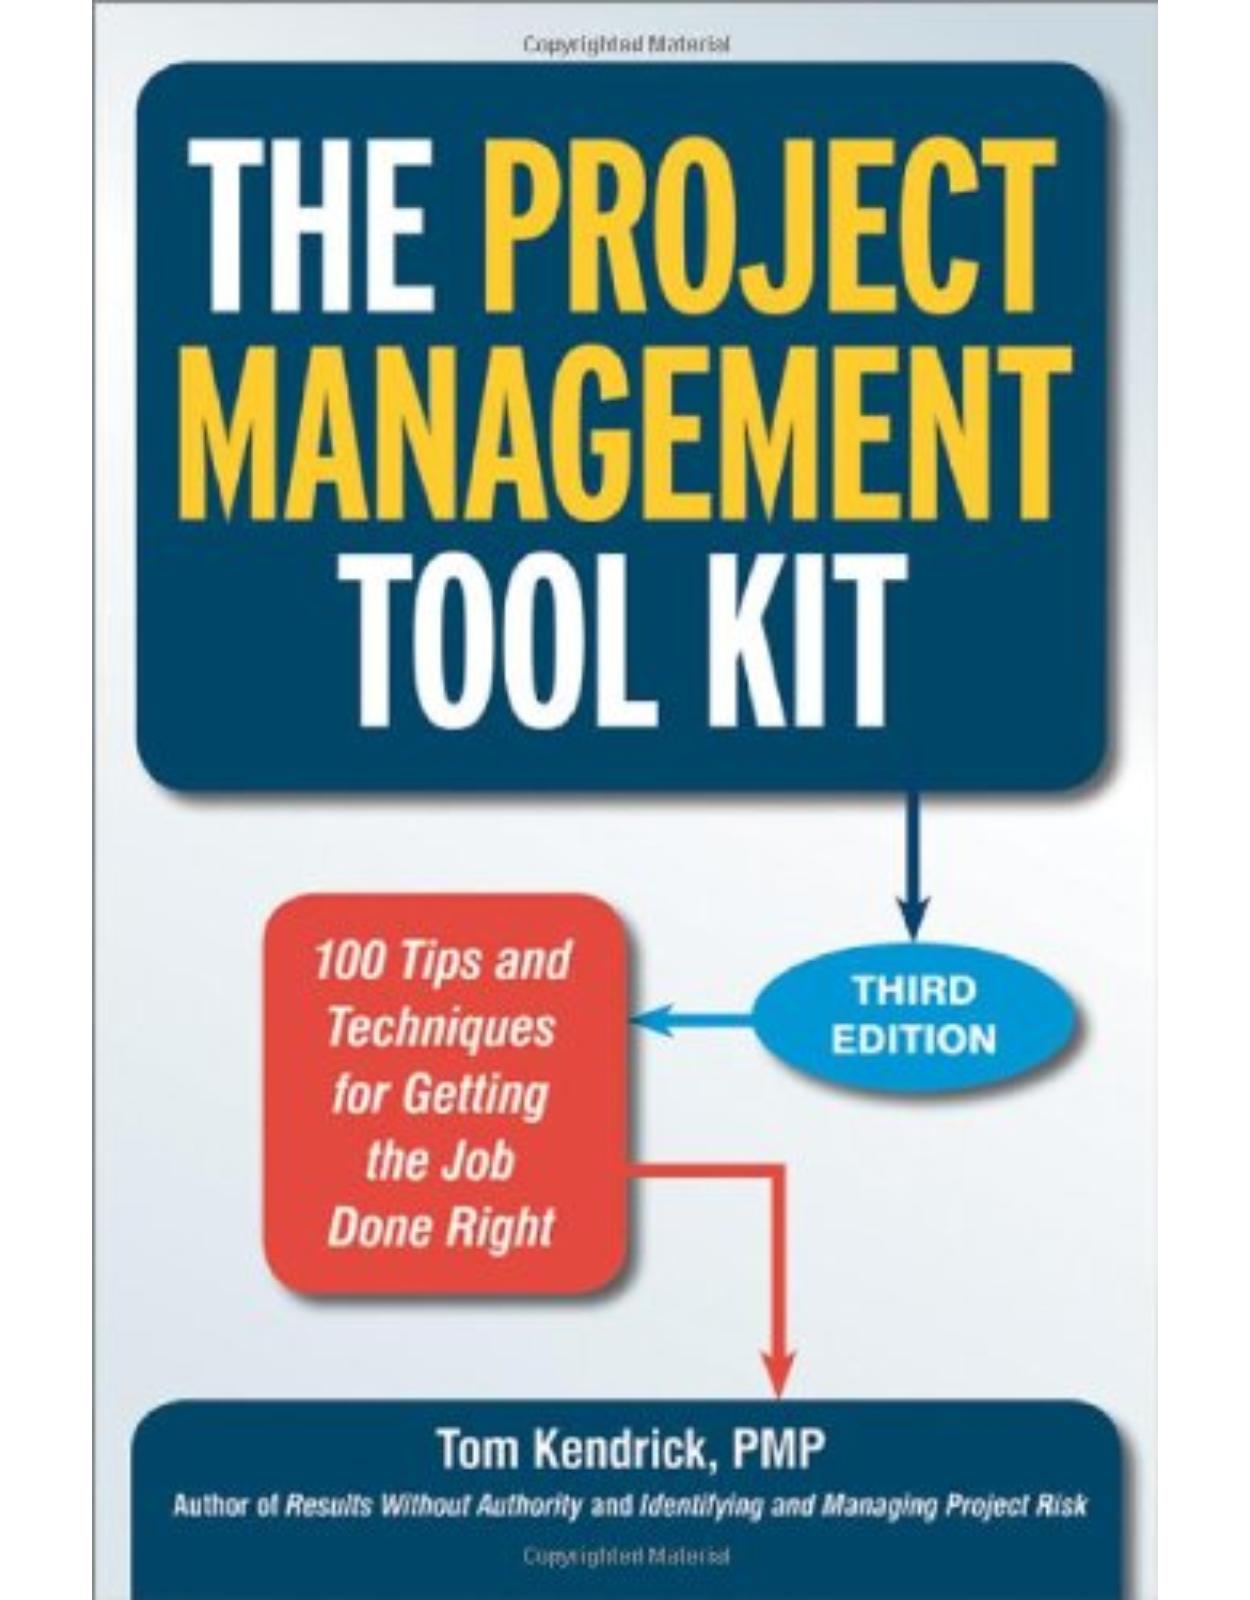 The Project Management Tool Kit: 100 Tips and Techniques for Getting the Job Done Right 